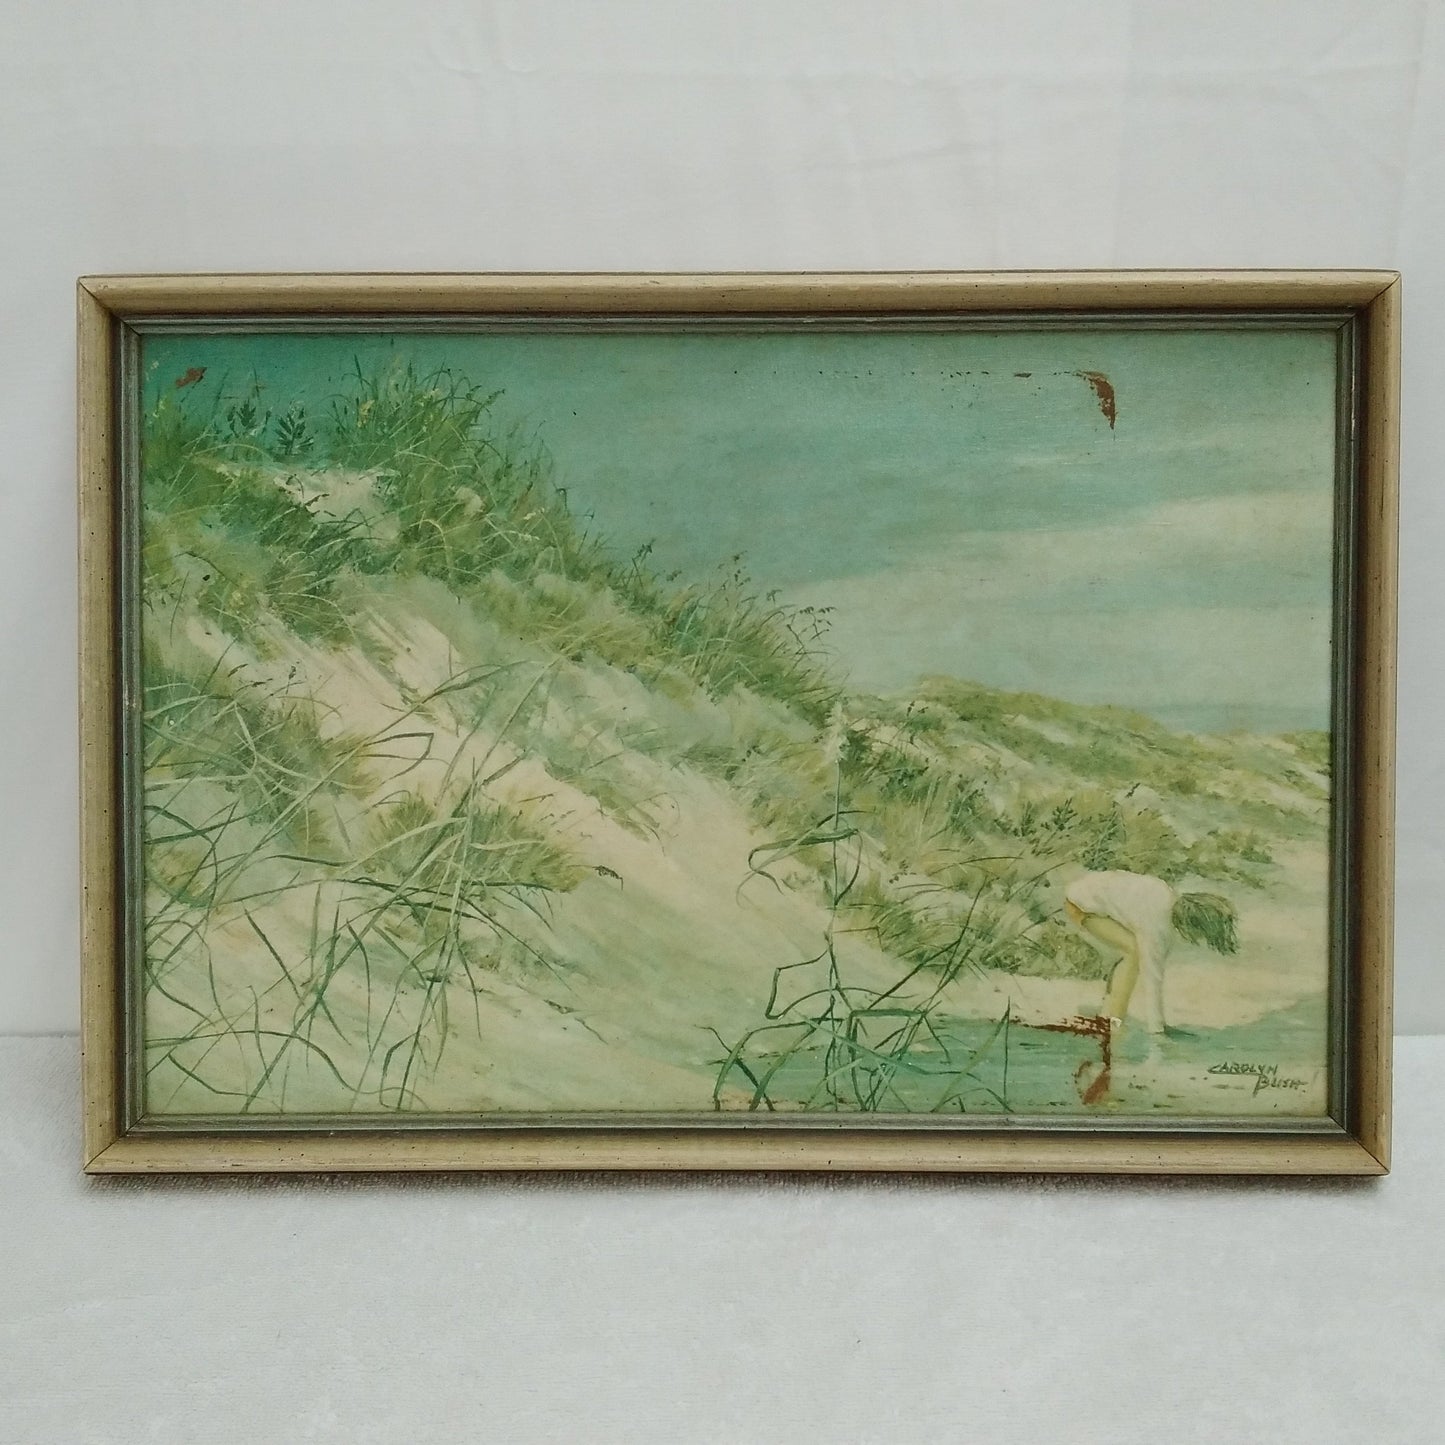 Carolyn Blish Original Signed and Framed Oil Painting -- "At the Beach"